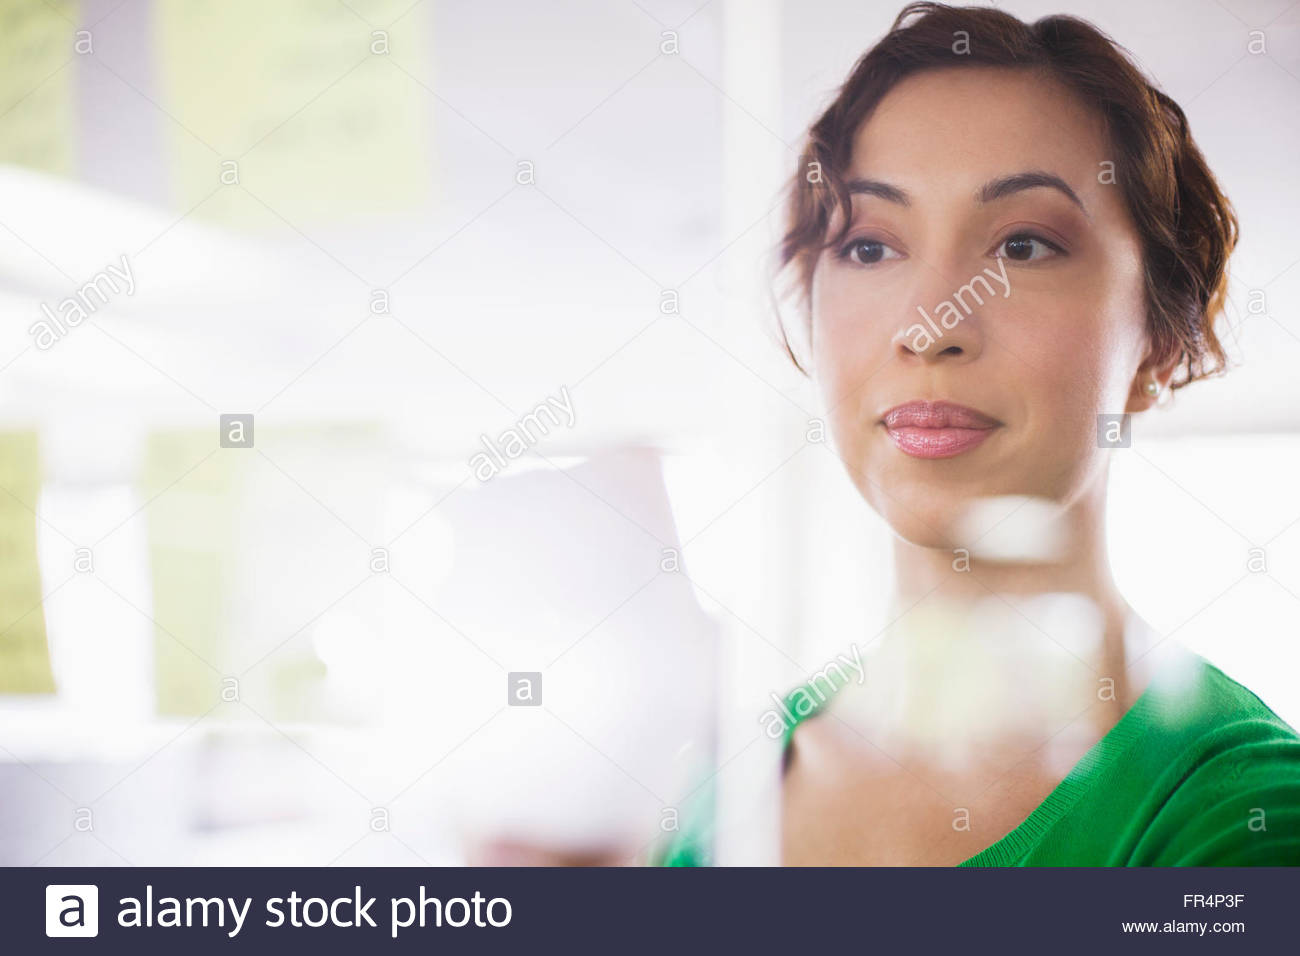 young, adult business woman focussed on chart Stock Photo